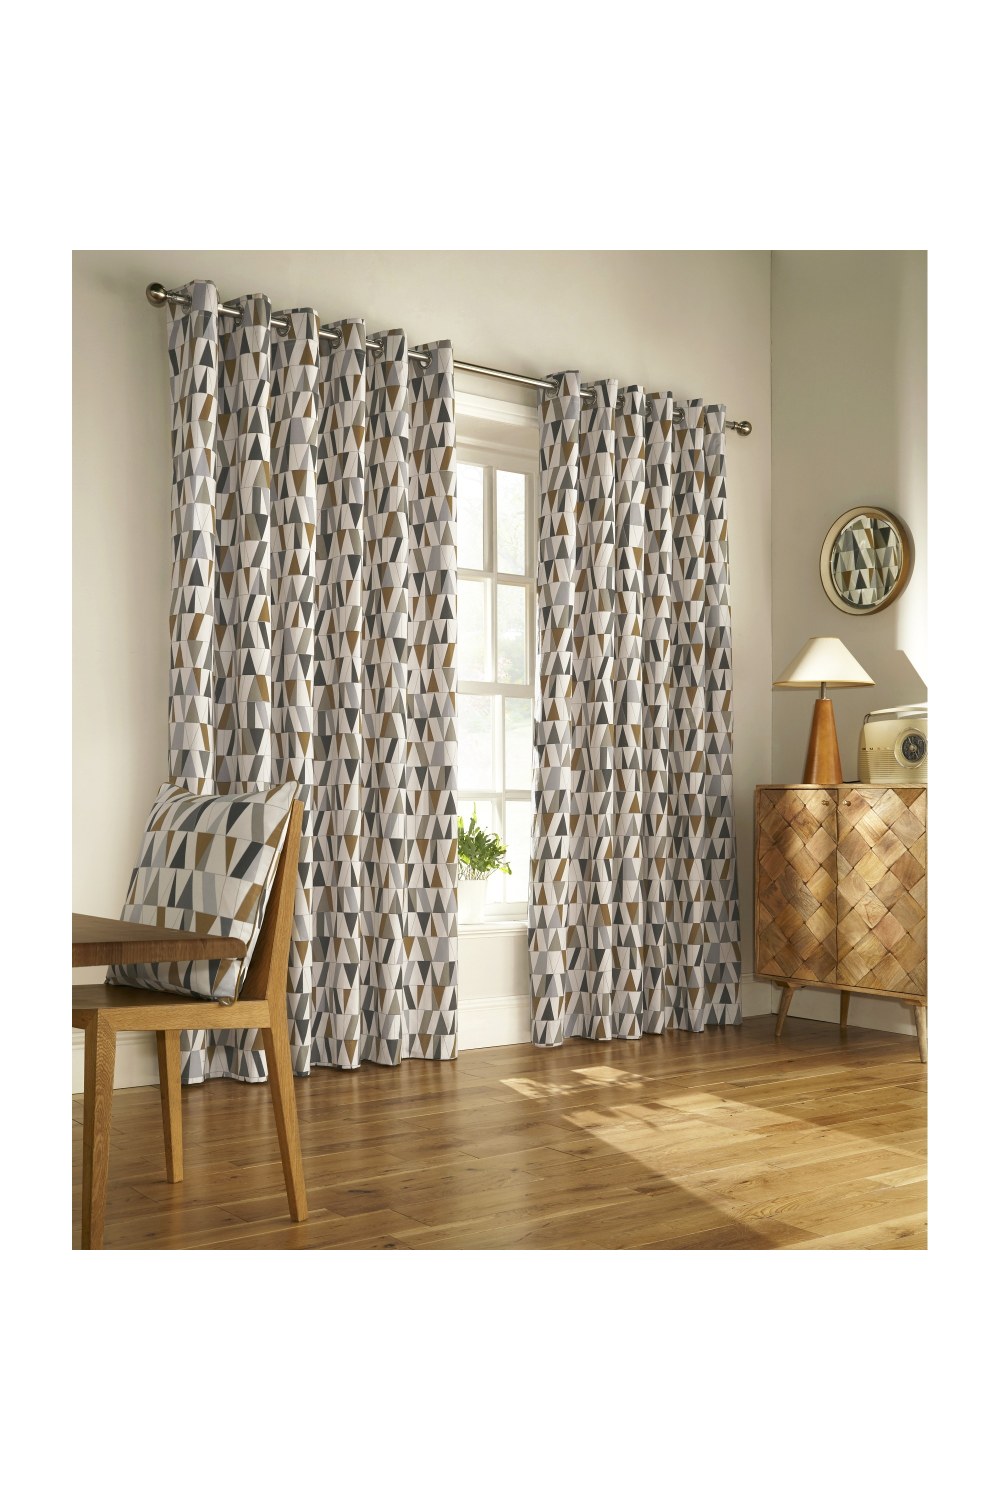 Furn Reno Ringtop Geometric Eyelet Curtains (Charcoal/Gold) (66in x 72in)